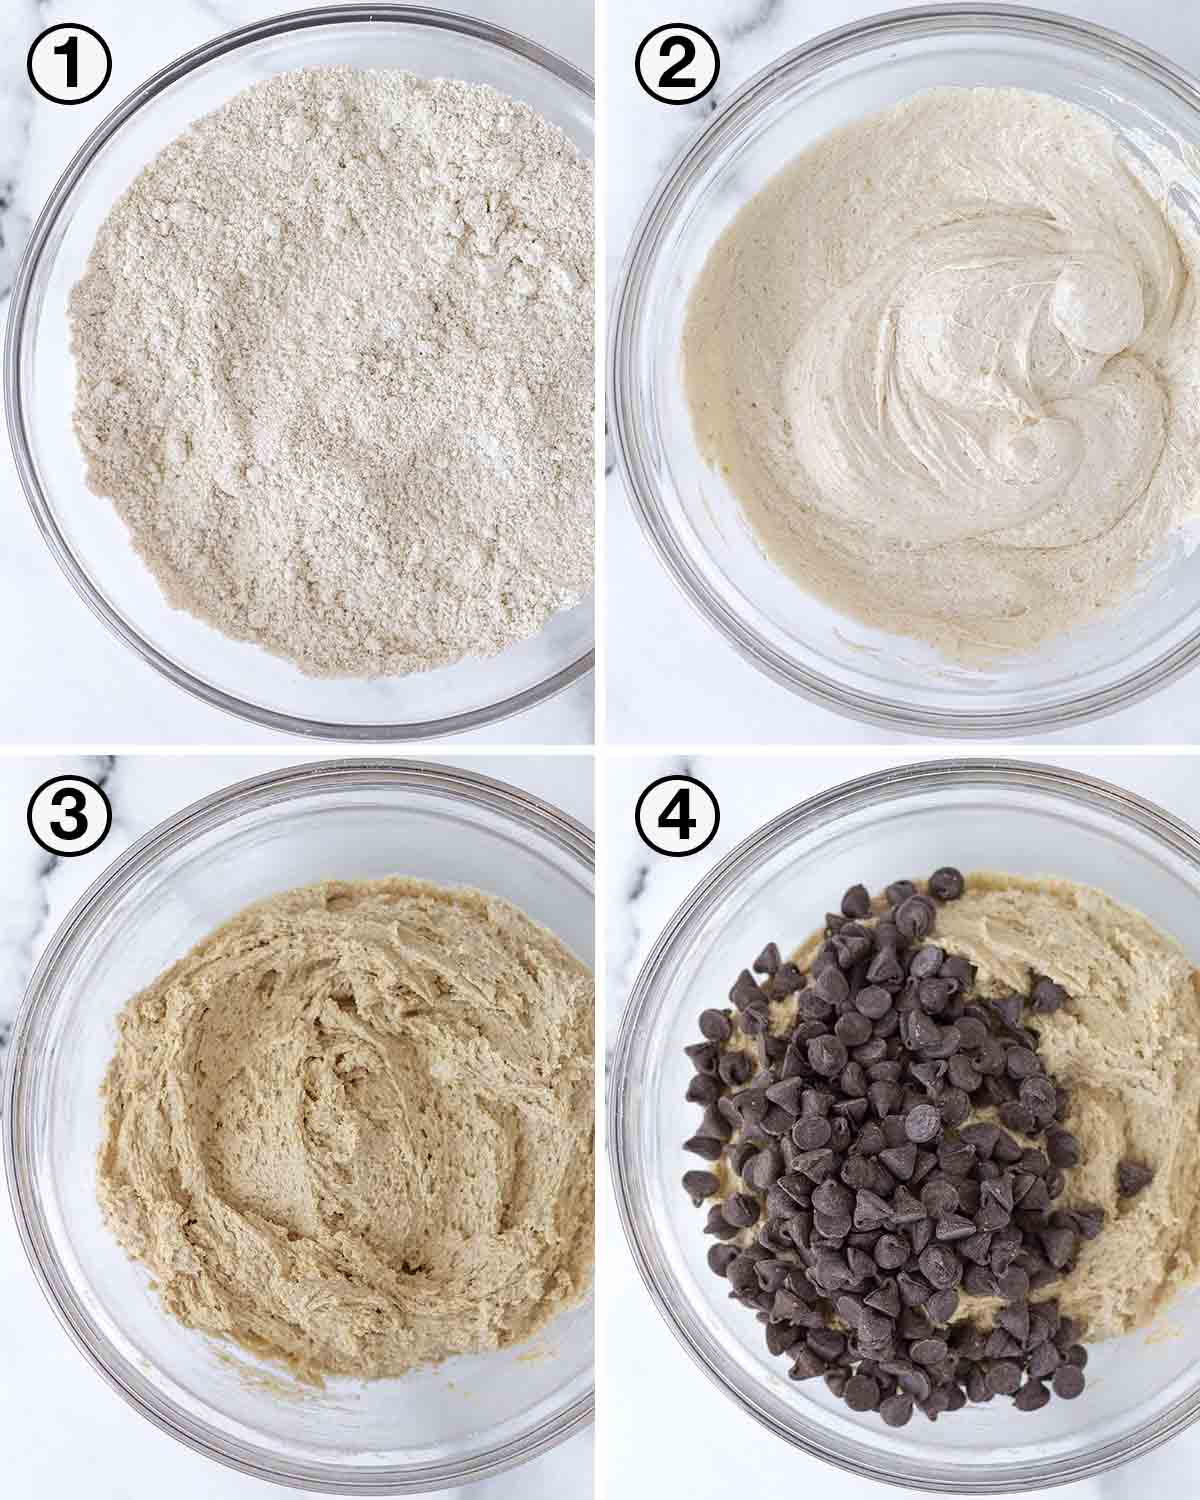 A collage of four images showing the first sequence of steps needed to make oat flour chocolate chip cookies.